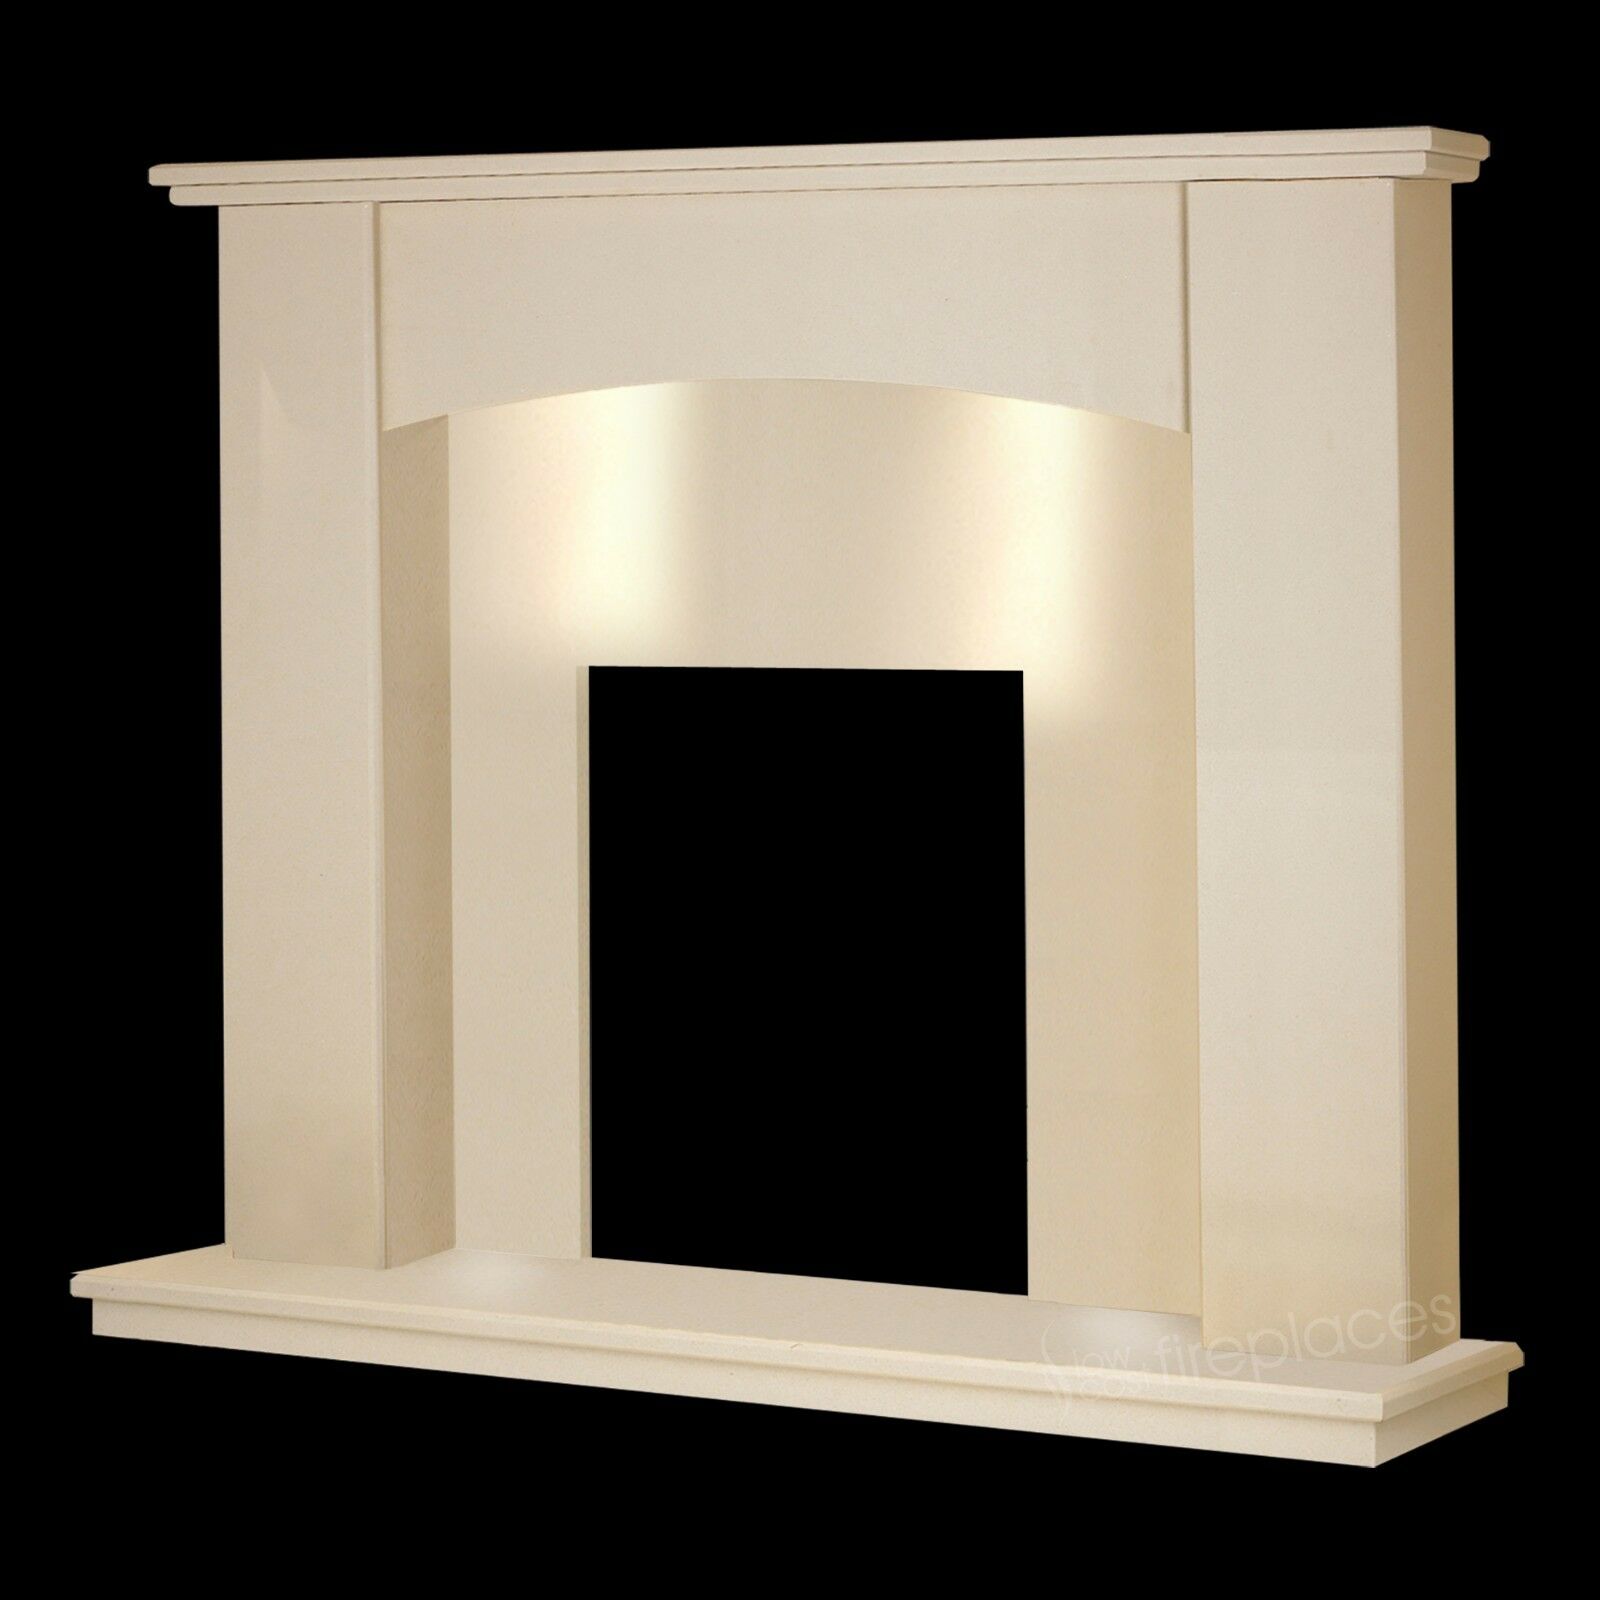 Modern Electric Fireplace with Mantel Lovely Details About Cream Stone Marble Modern Curved Surround Electric Fire Fireplace Suite Lights